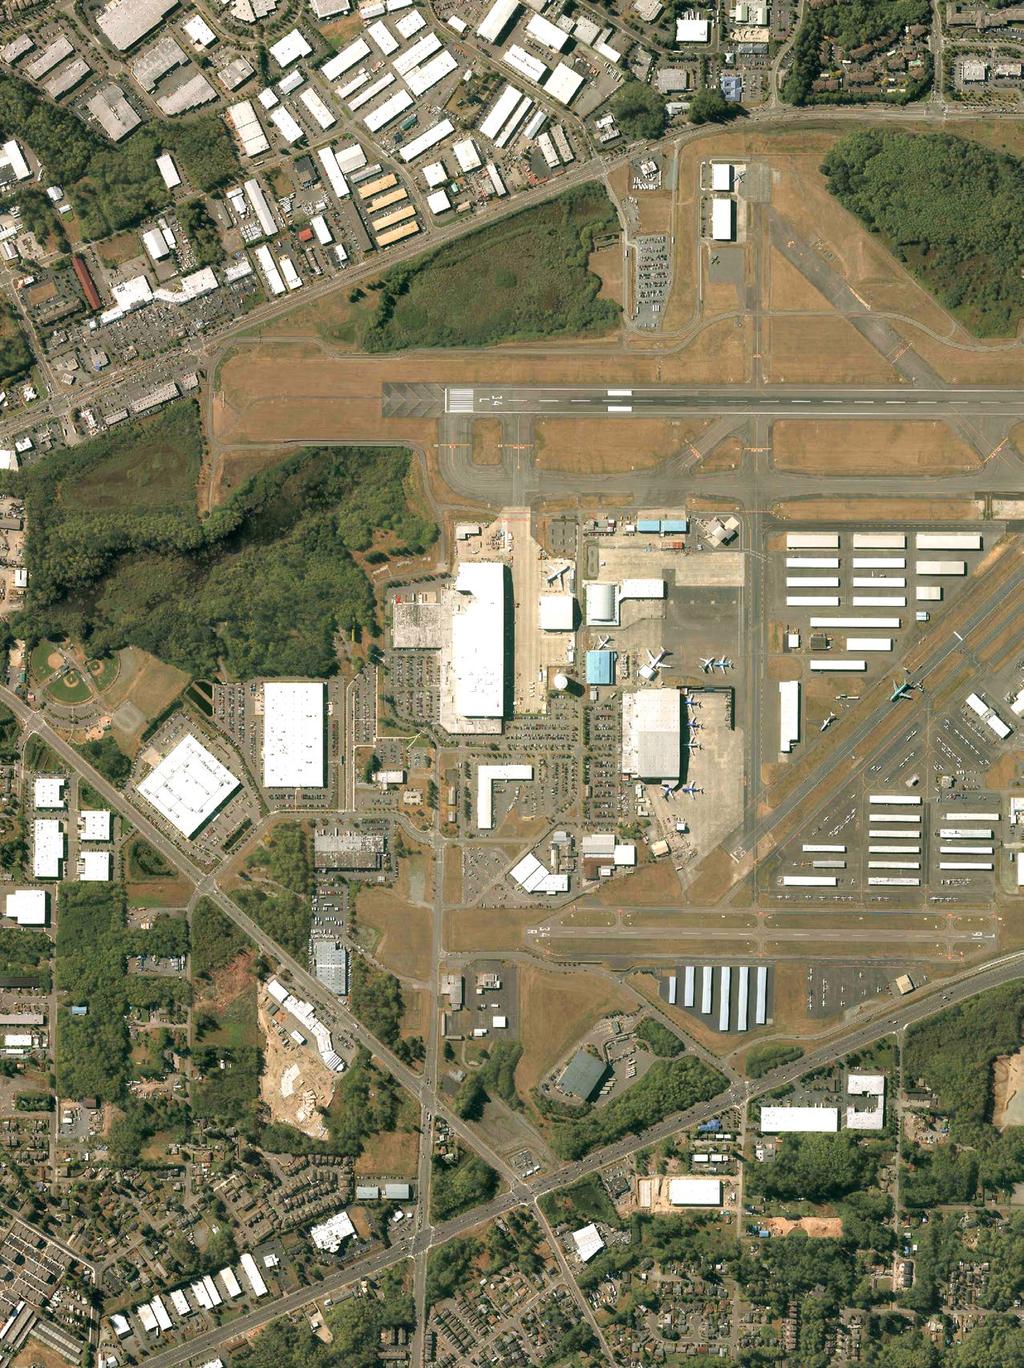 ELECTROIMPACT Paine Field HISTORIC FLIGHT FOUNDATION Located in Everett, Washington, Paine Field/Snohomish County Airport is home to over 550 aircraft, including single engine recreational aircraft,